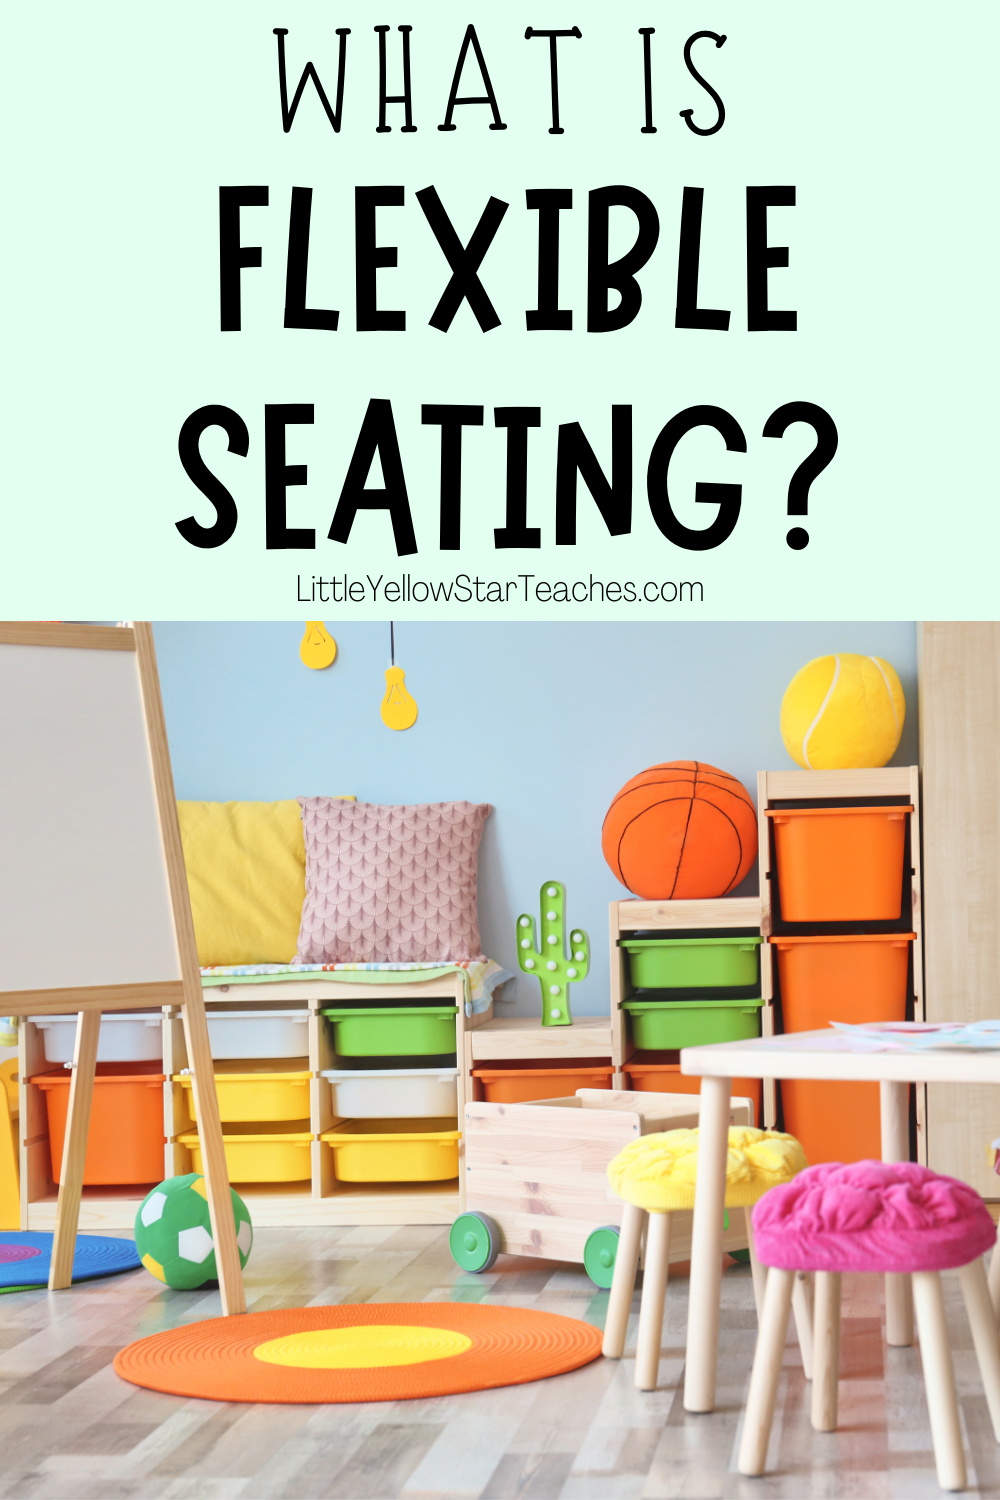 What Is Flexible Seating?